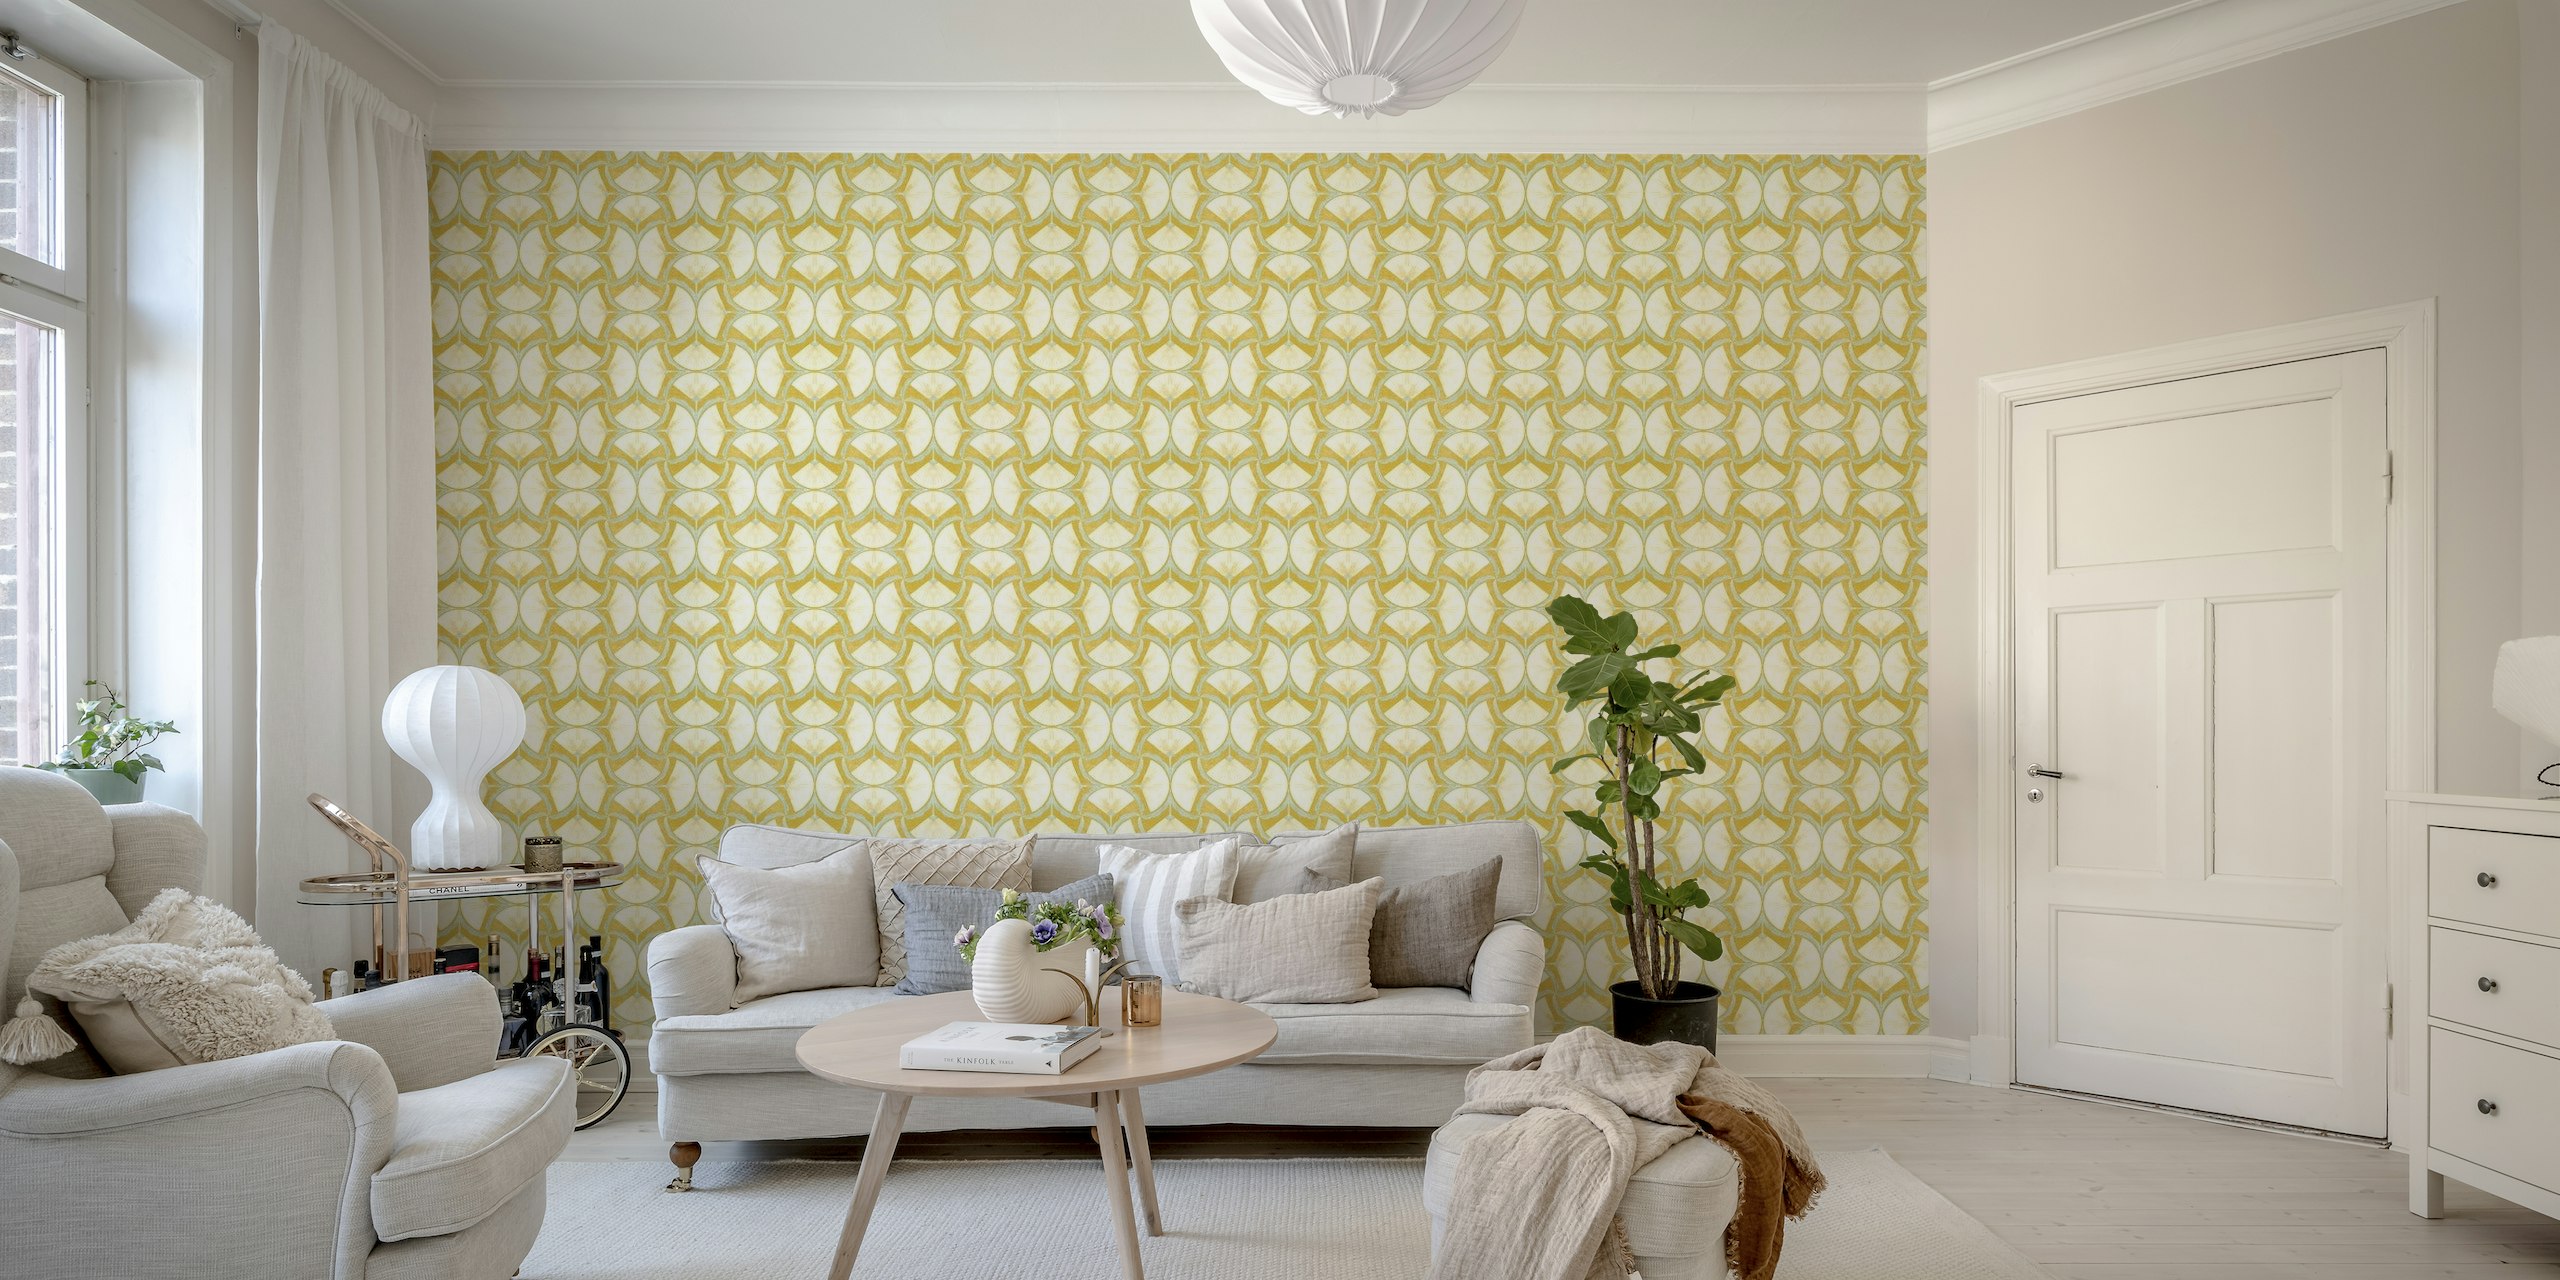 Floral Harmony: Delicate Hand-Drawn Symmetry on mustard background papel pintado